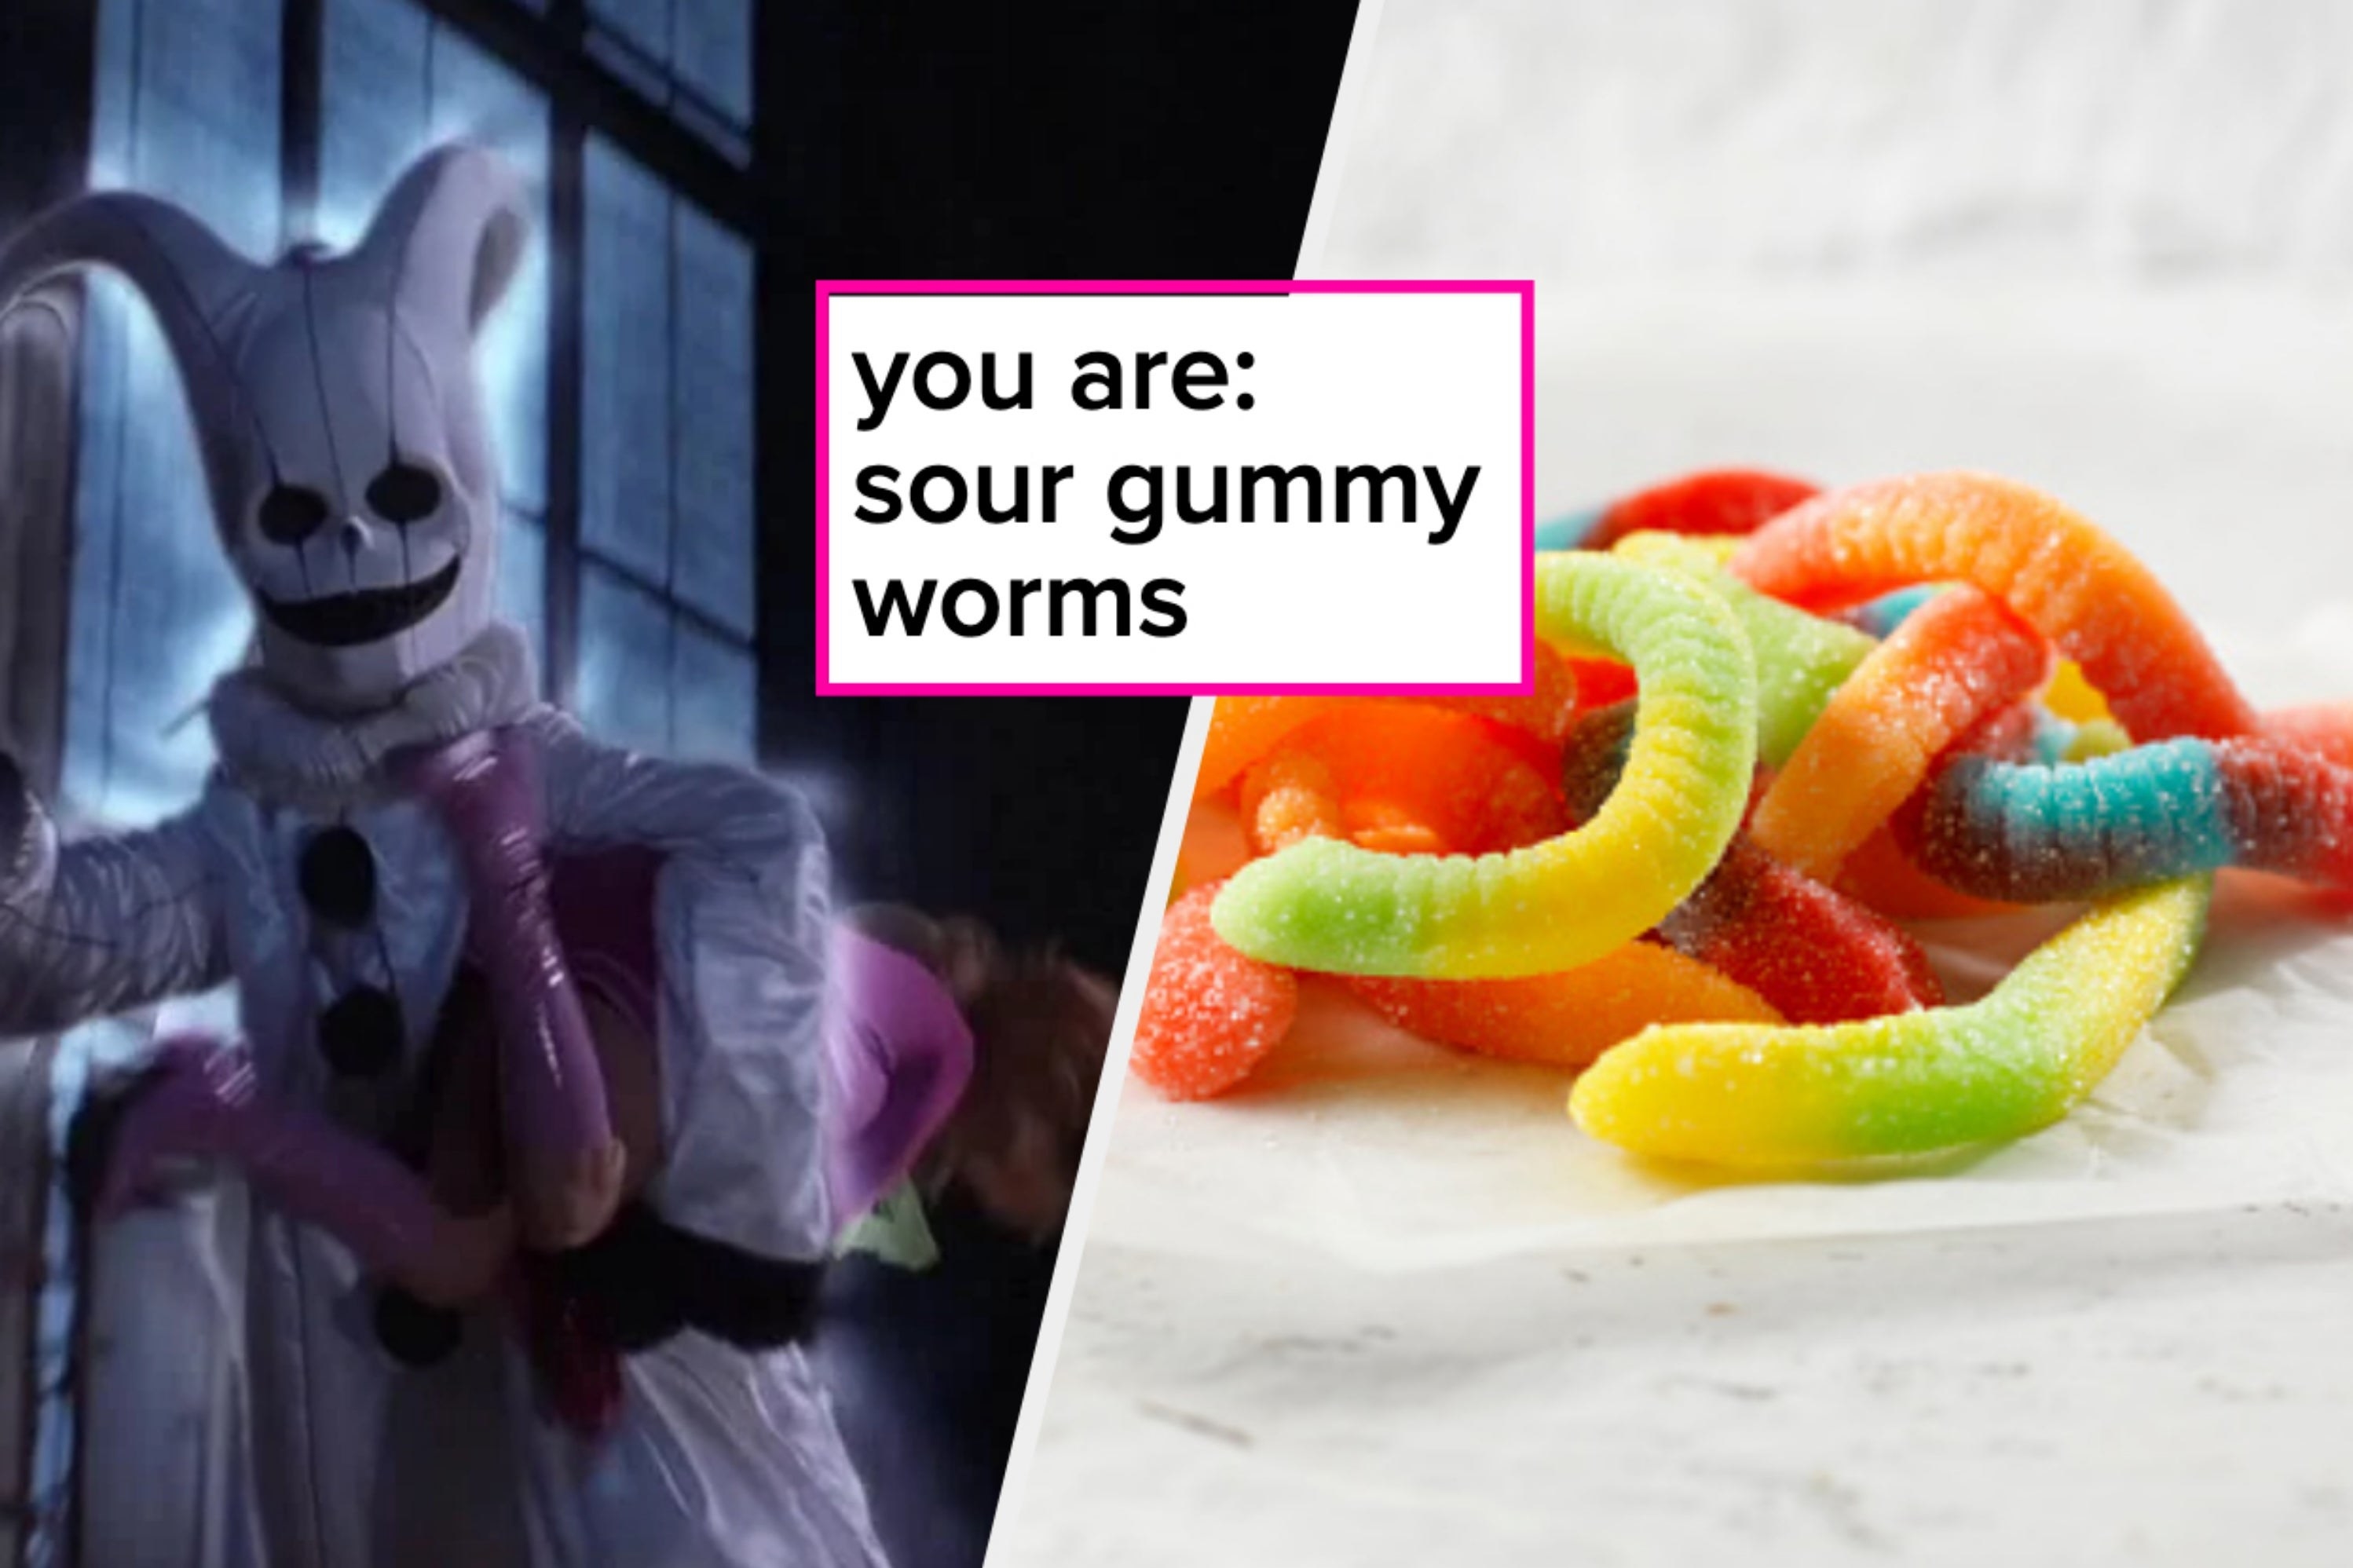 Two images; on the left: a scene where the ghost carries Daphne away from &quot;Scooby-Doo&quot; (2002) and on the right: an image of sour gummy worms with the text &quot;you are: sour gummy worms&quot; overlayed on top